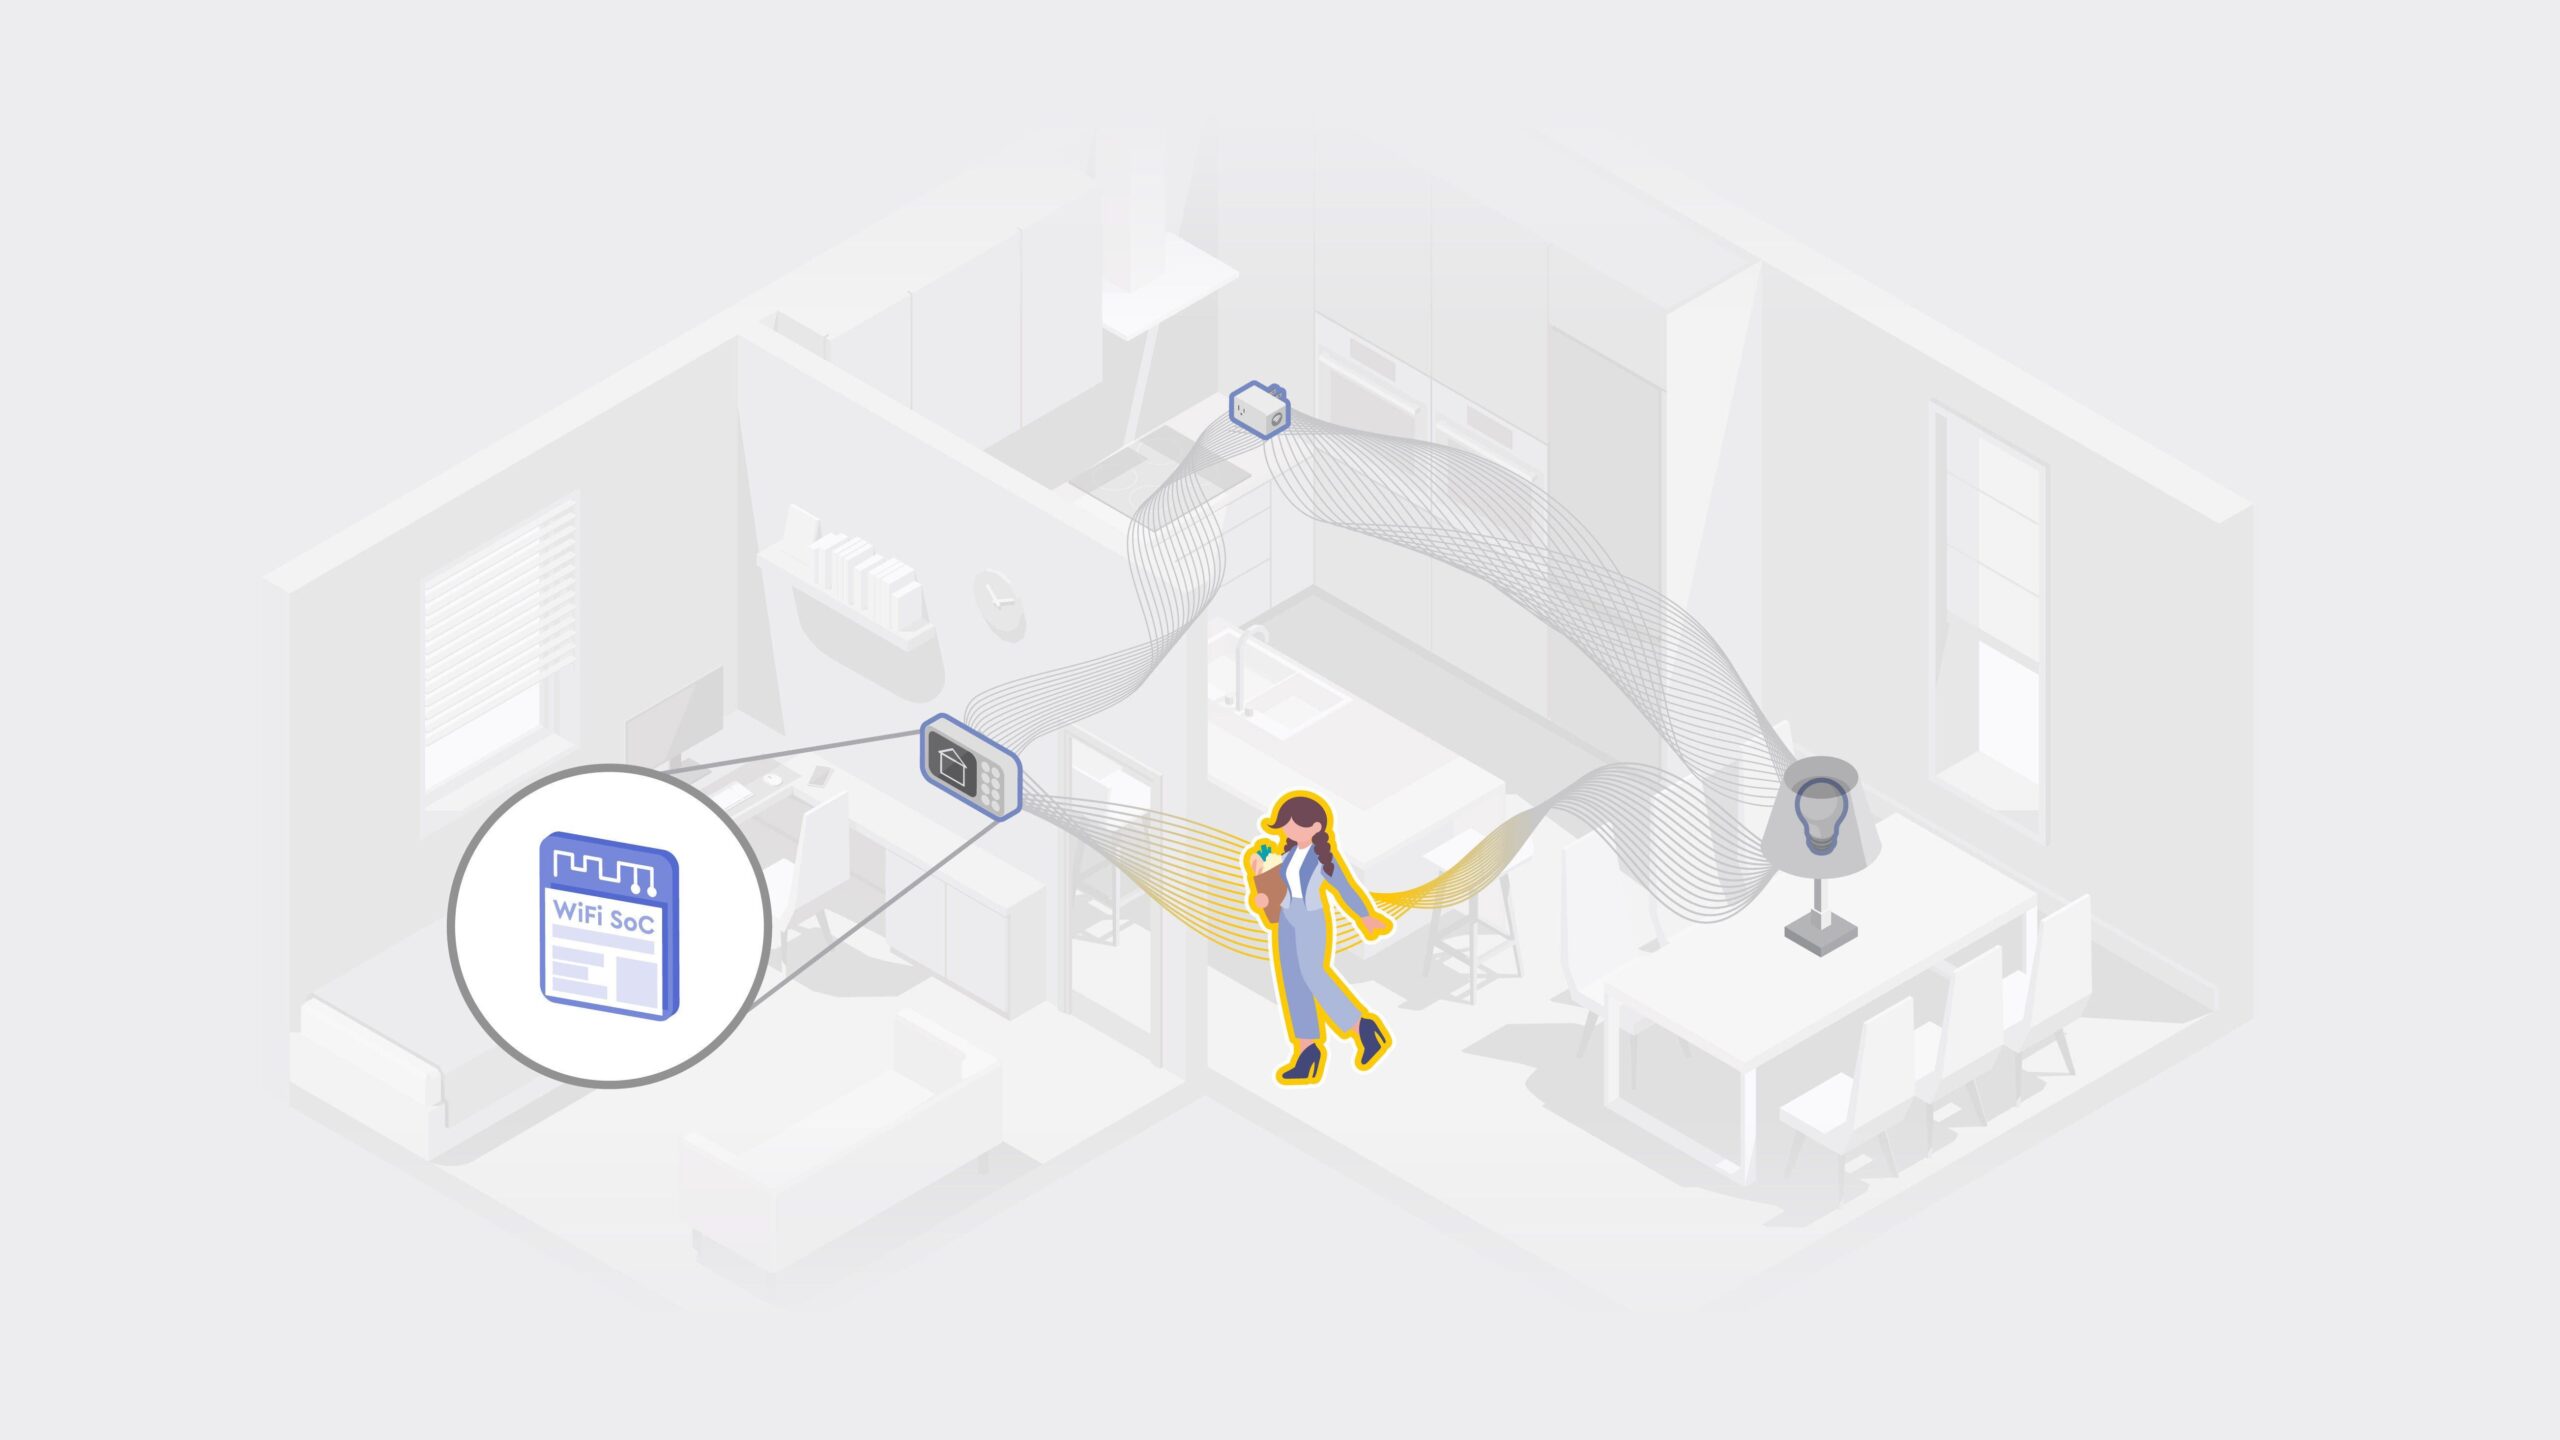 A woman walking through her home and being detected by Wi-Fi signals via a Wi-Fi Sensing network created by her security system panel, smart light bulb, and smart plug.